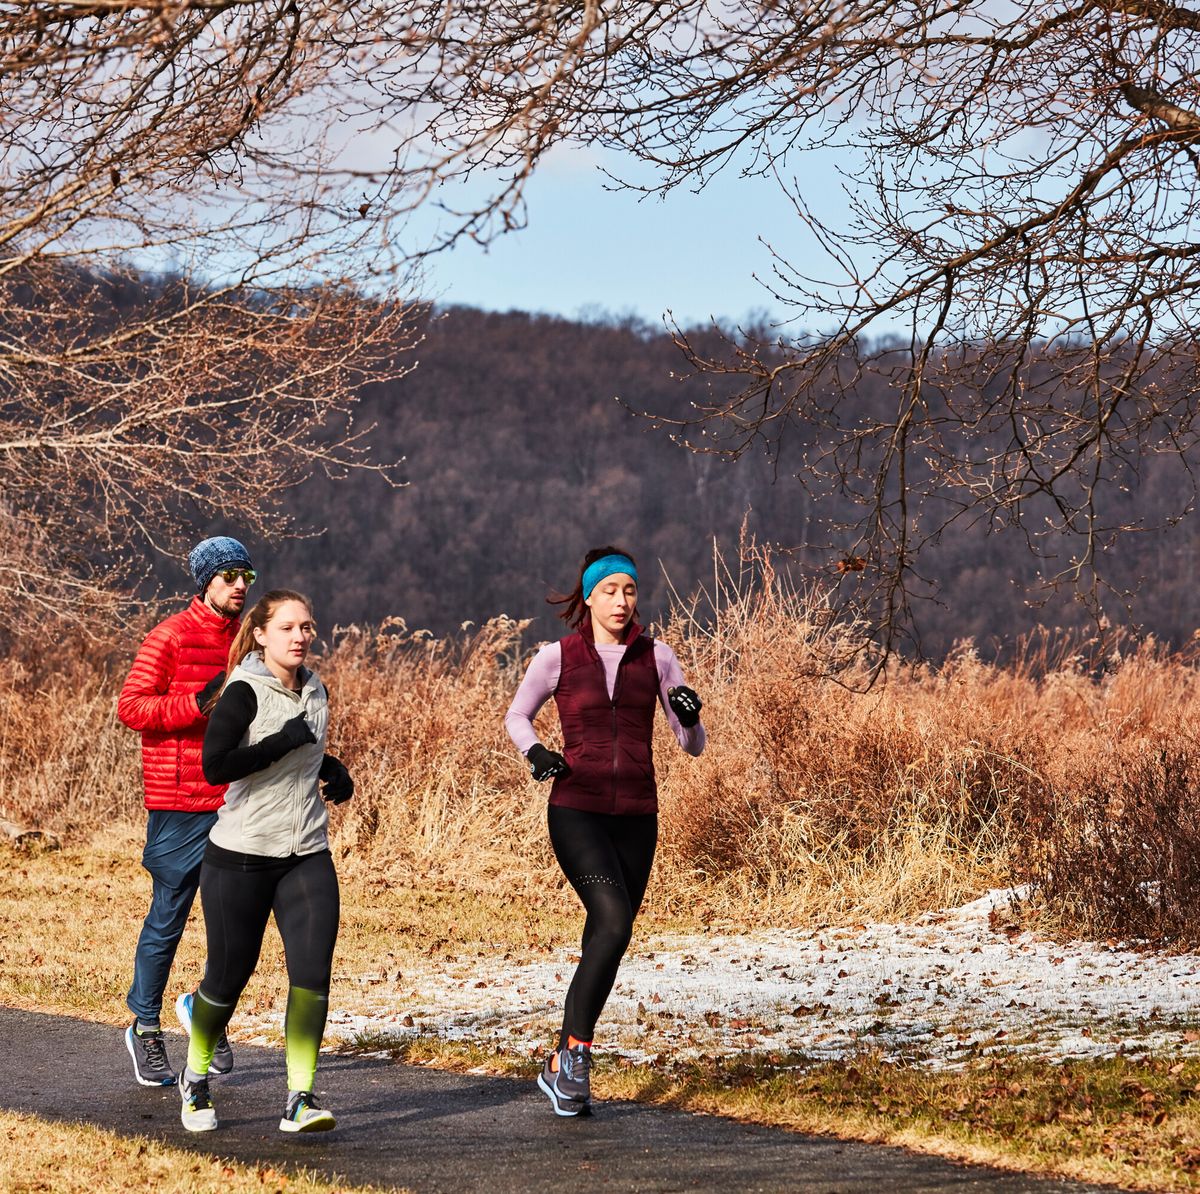 Is it Best to Exercise During the Winter Months or the Summer Months?